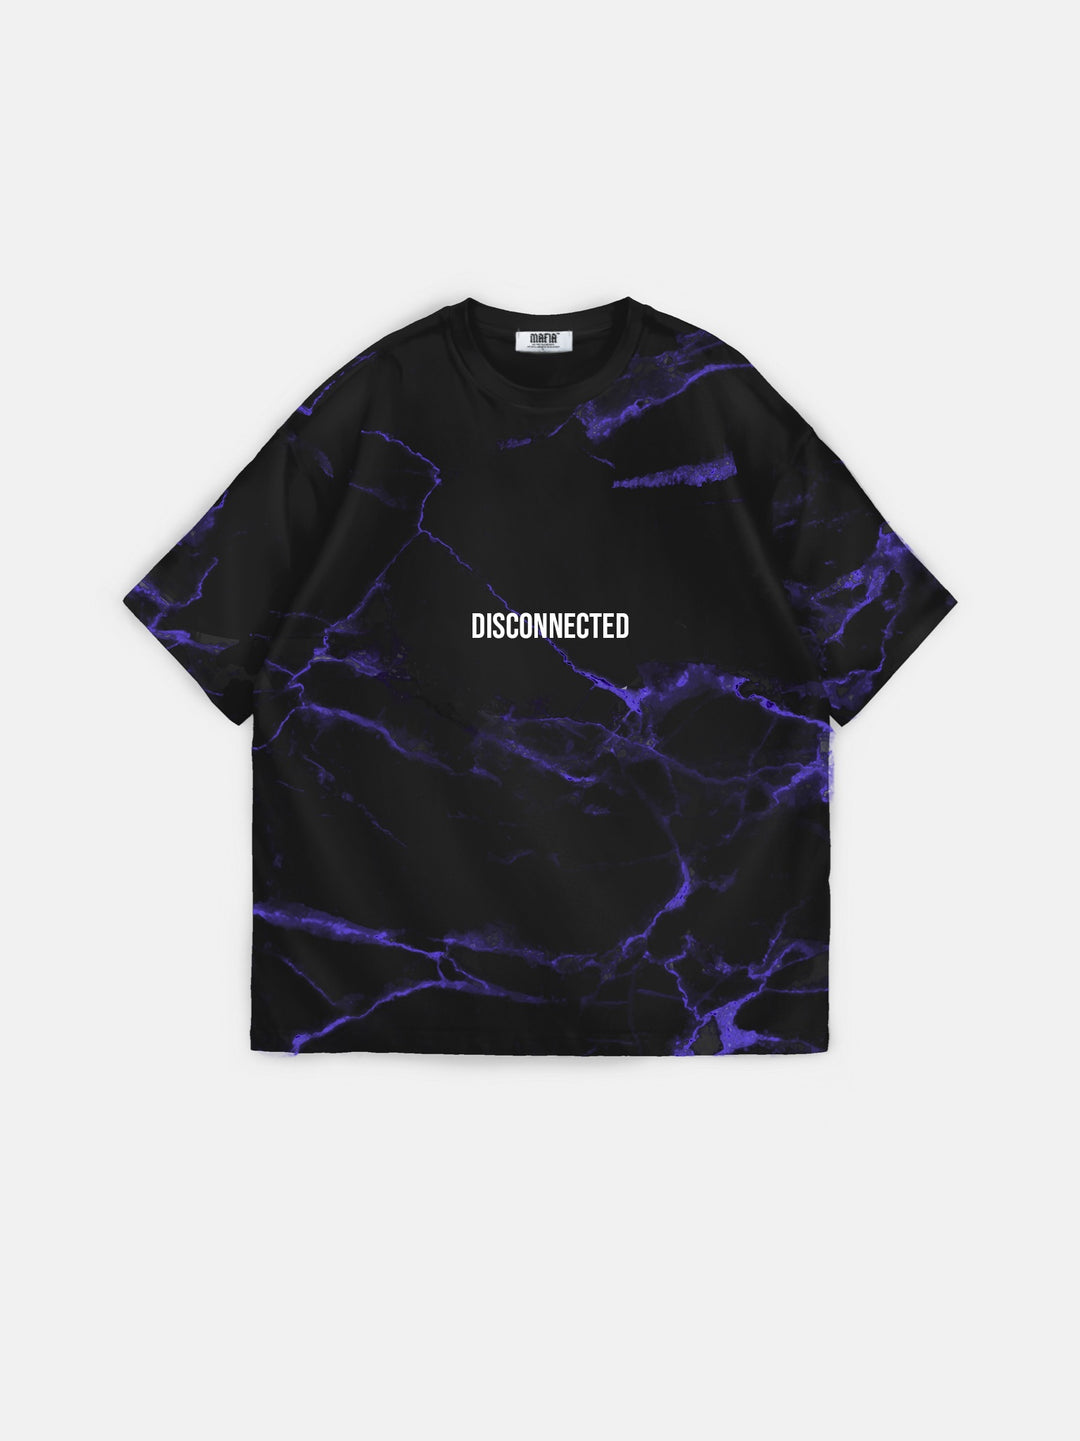 Oversize Disconnected T-shirt - Black and Lila